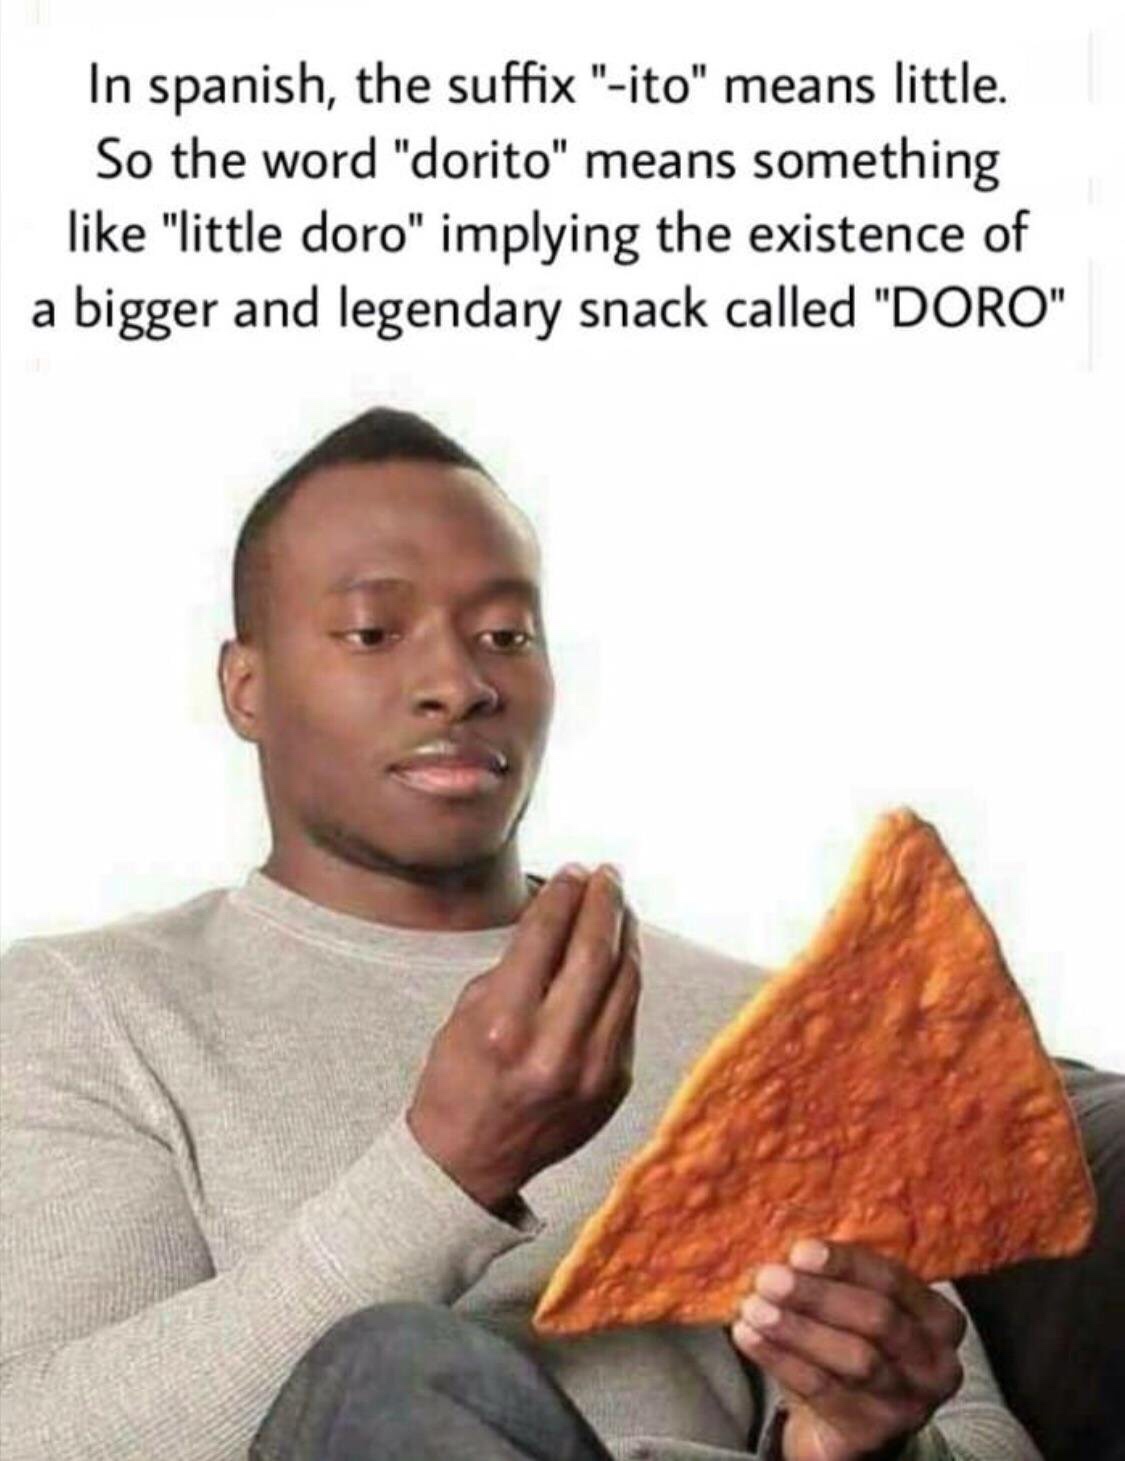 dashing black man holding a dangerously large dorito - In spanish, the suffix "ito" means little. So the word "dorito" means something "little doro" implying the existence of a bigger and legendary snack called "Doro"